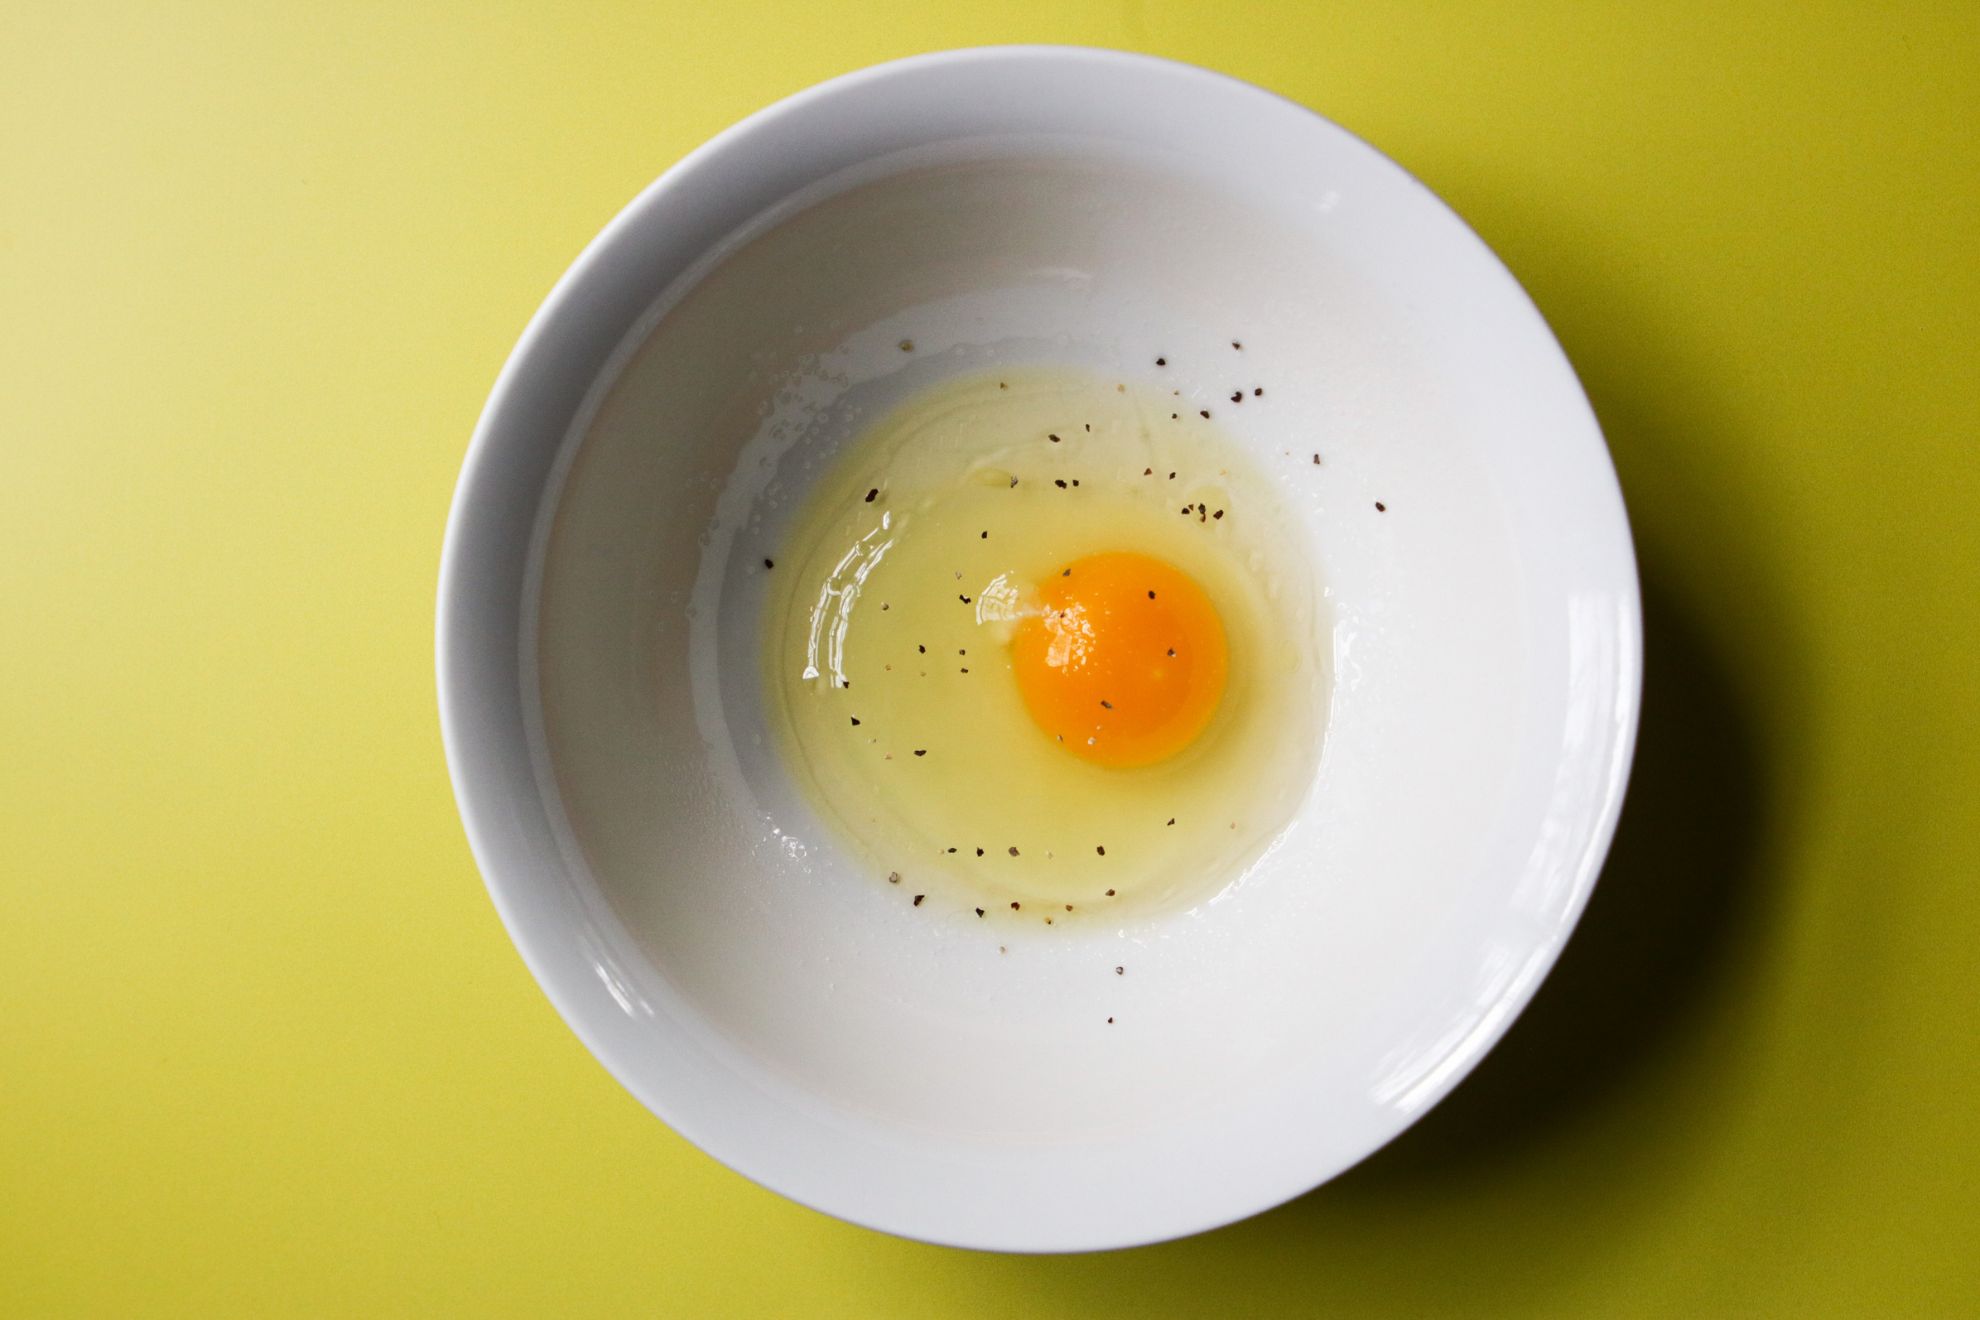 This is an overhead horizontal image of a white bowl with a raw egg in the center topped with pepper. The bowl sits on a yellow surface.